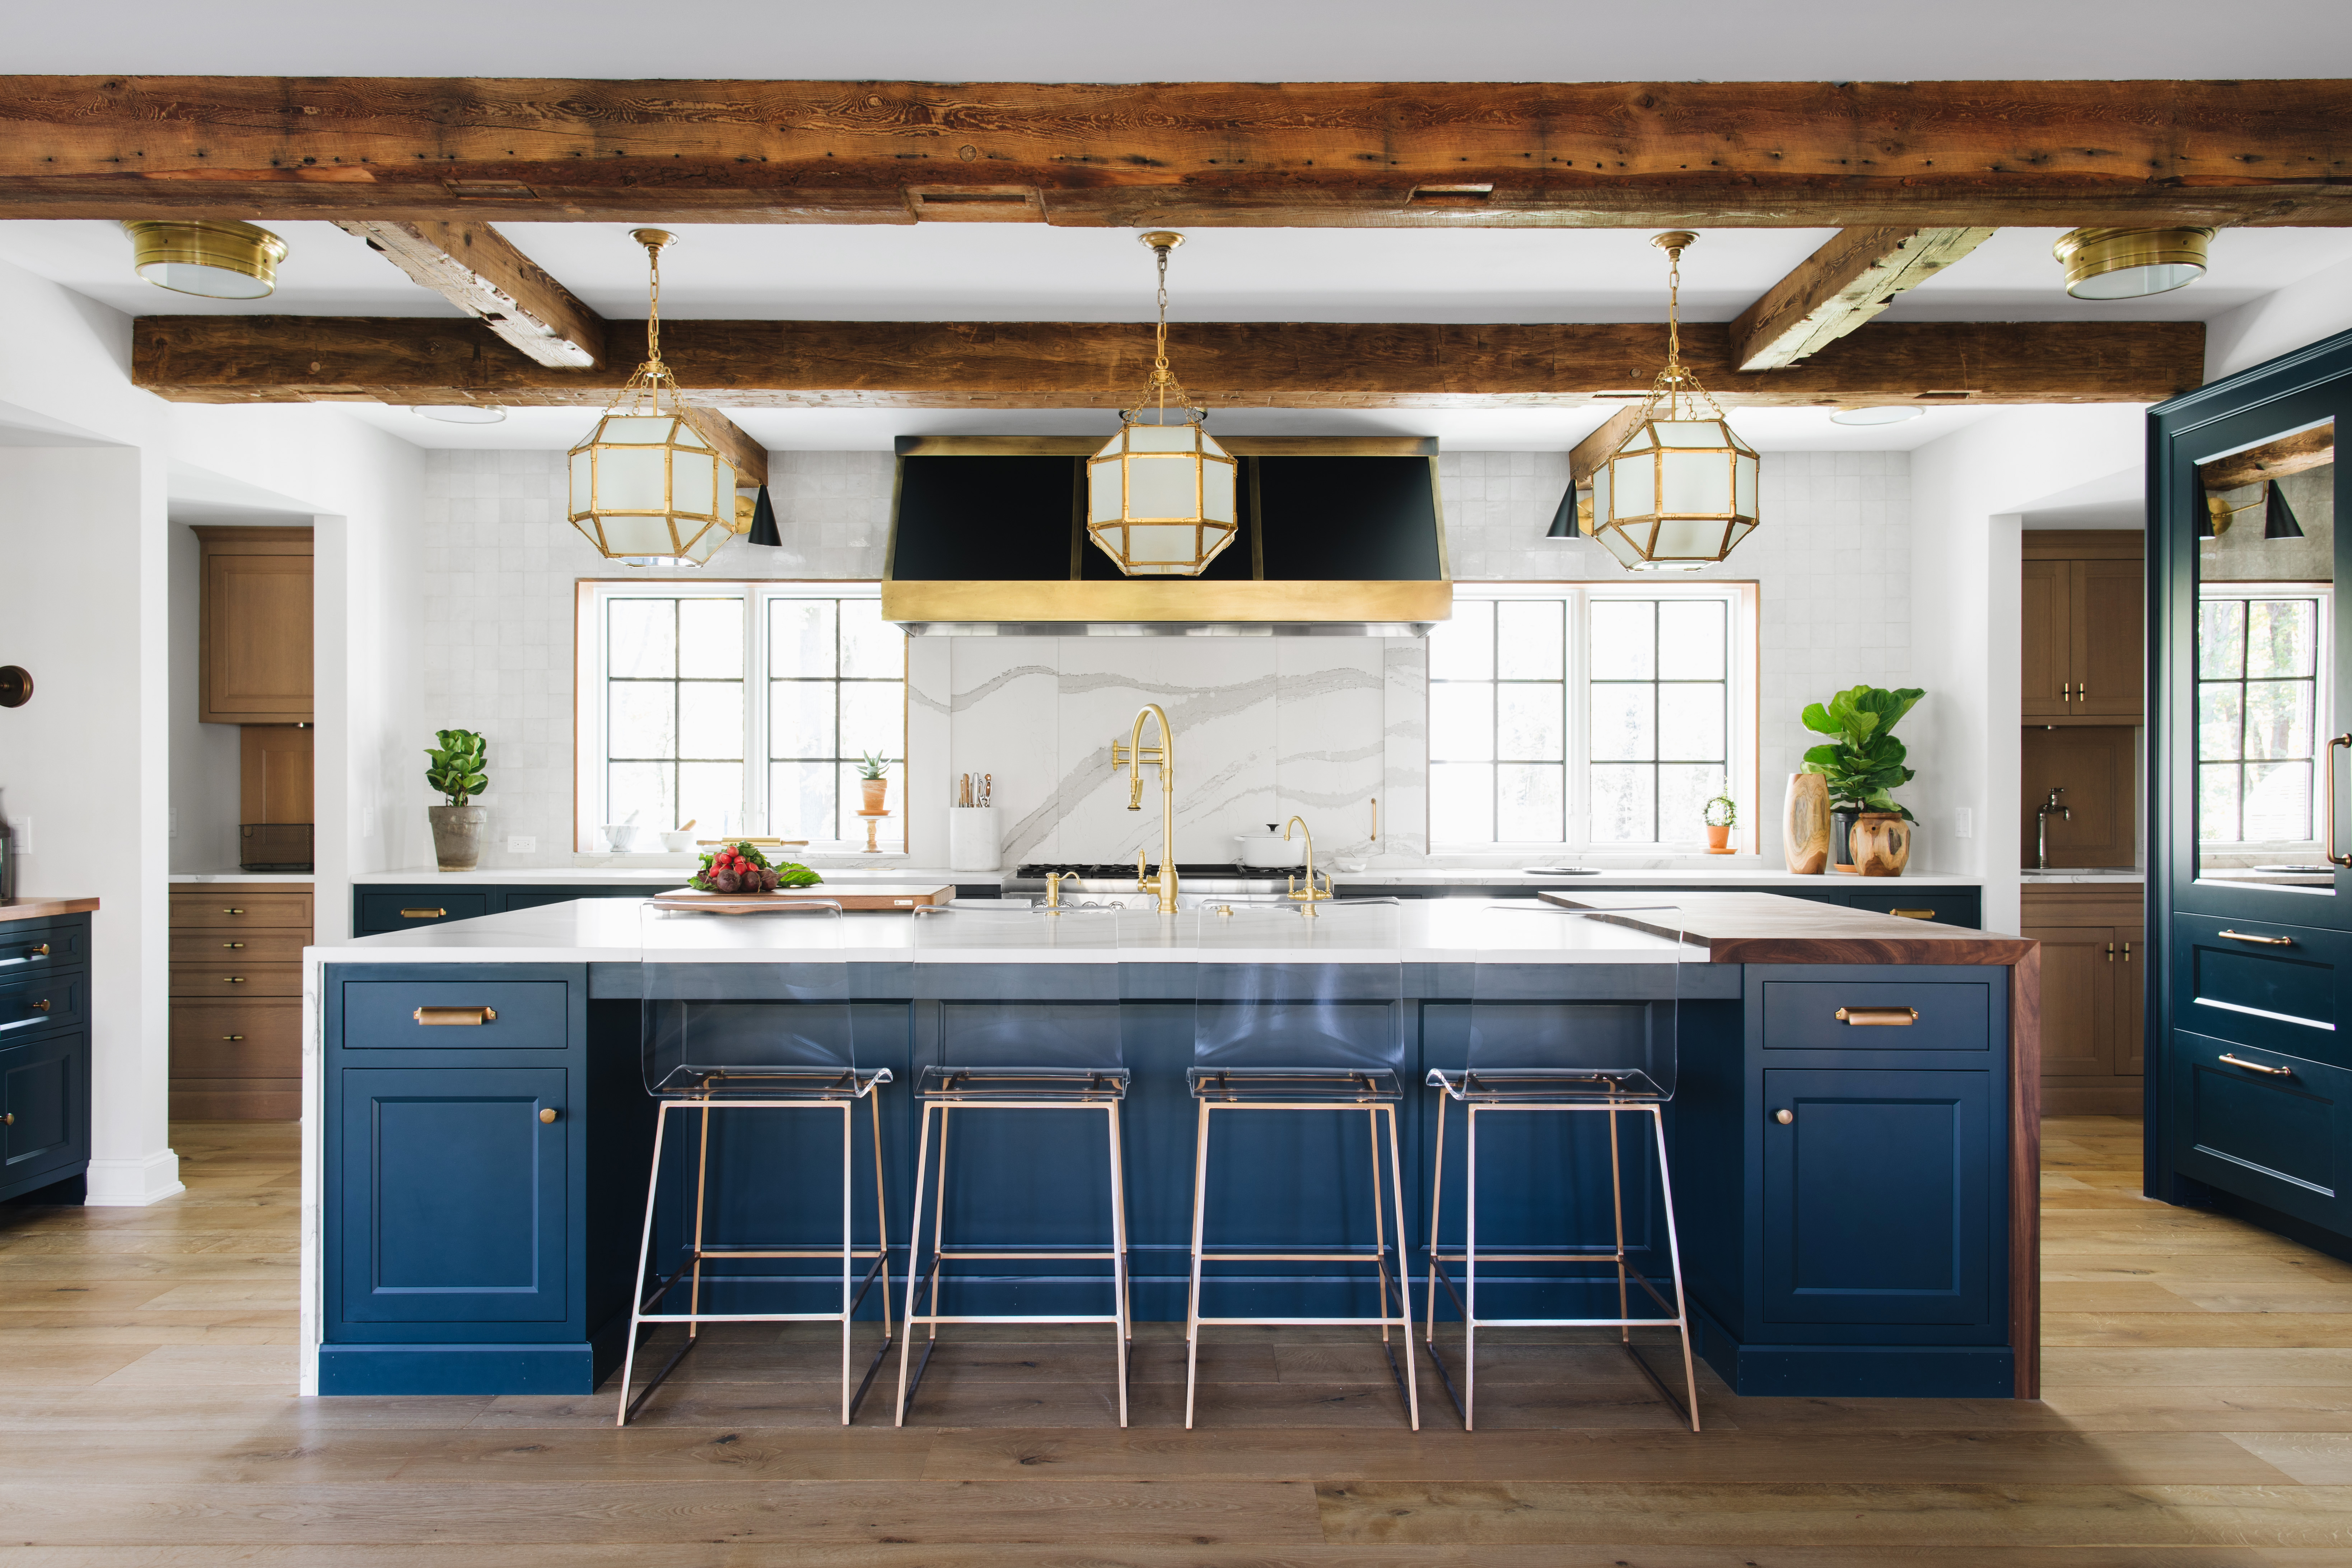 Deep blue kitchen with brass accents